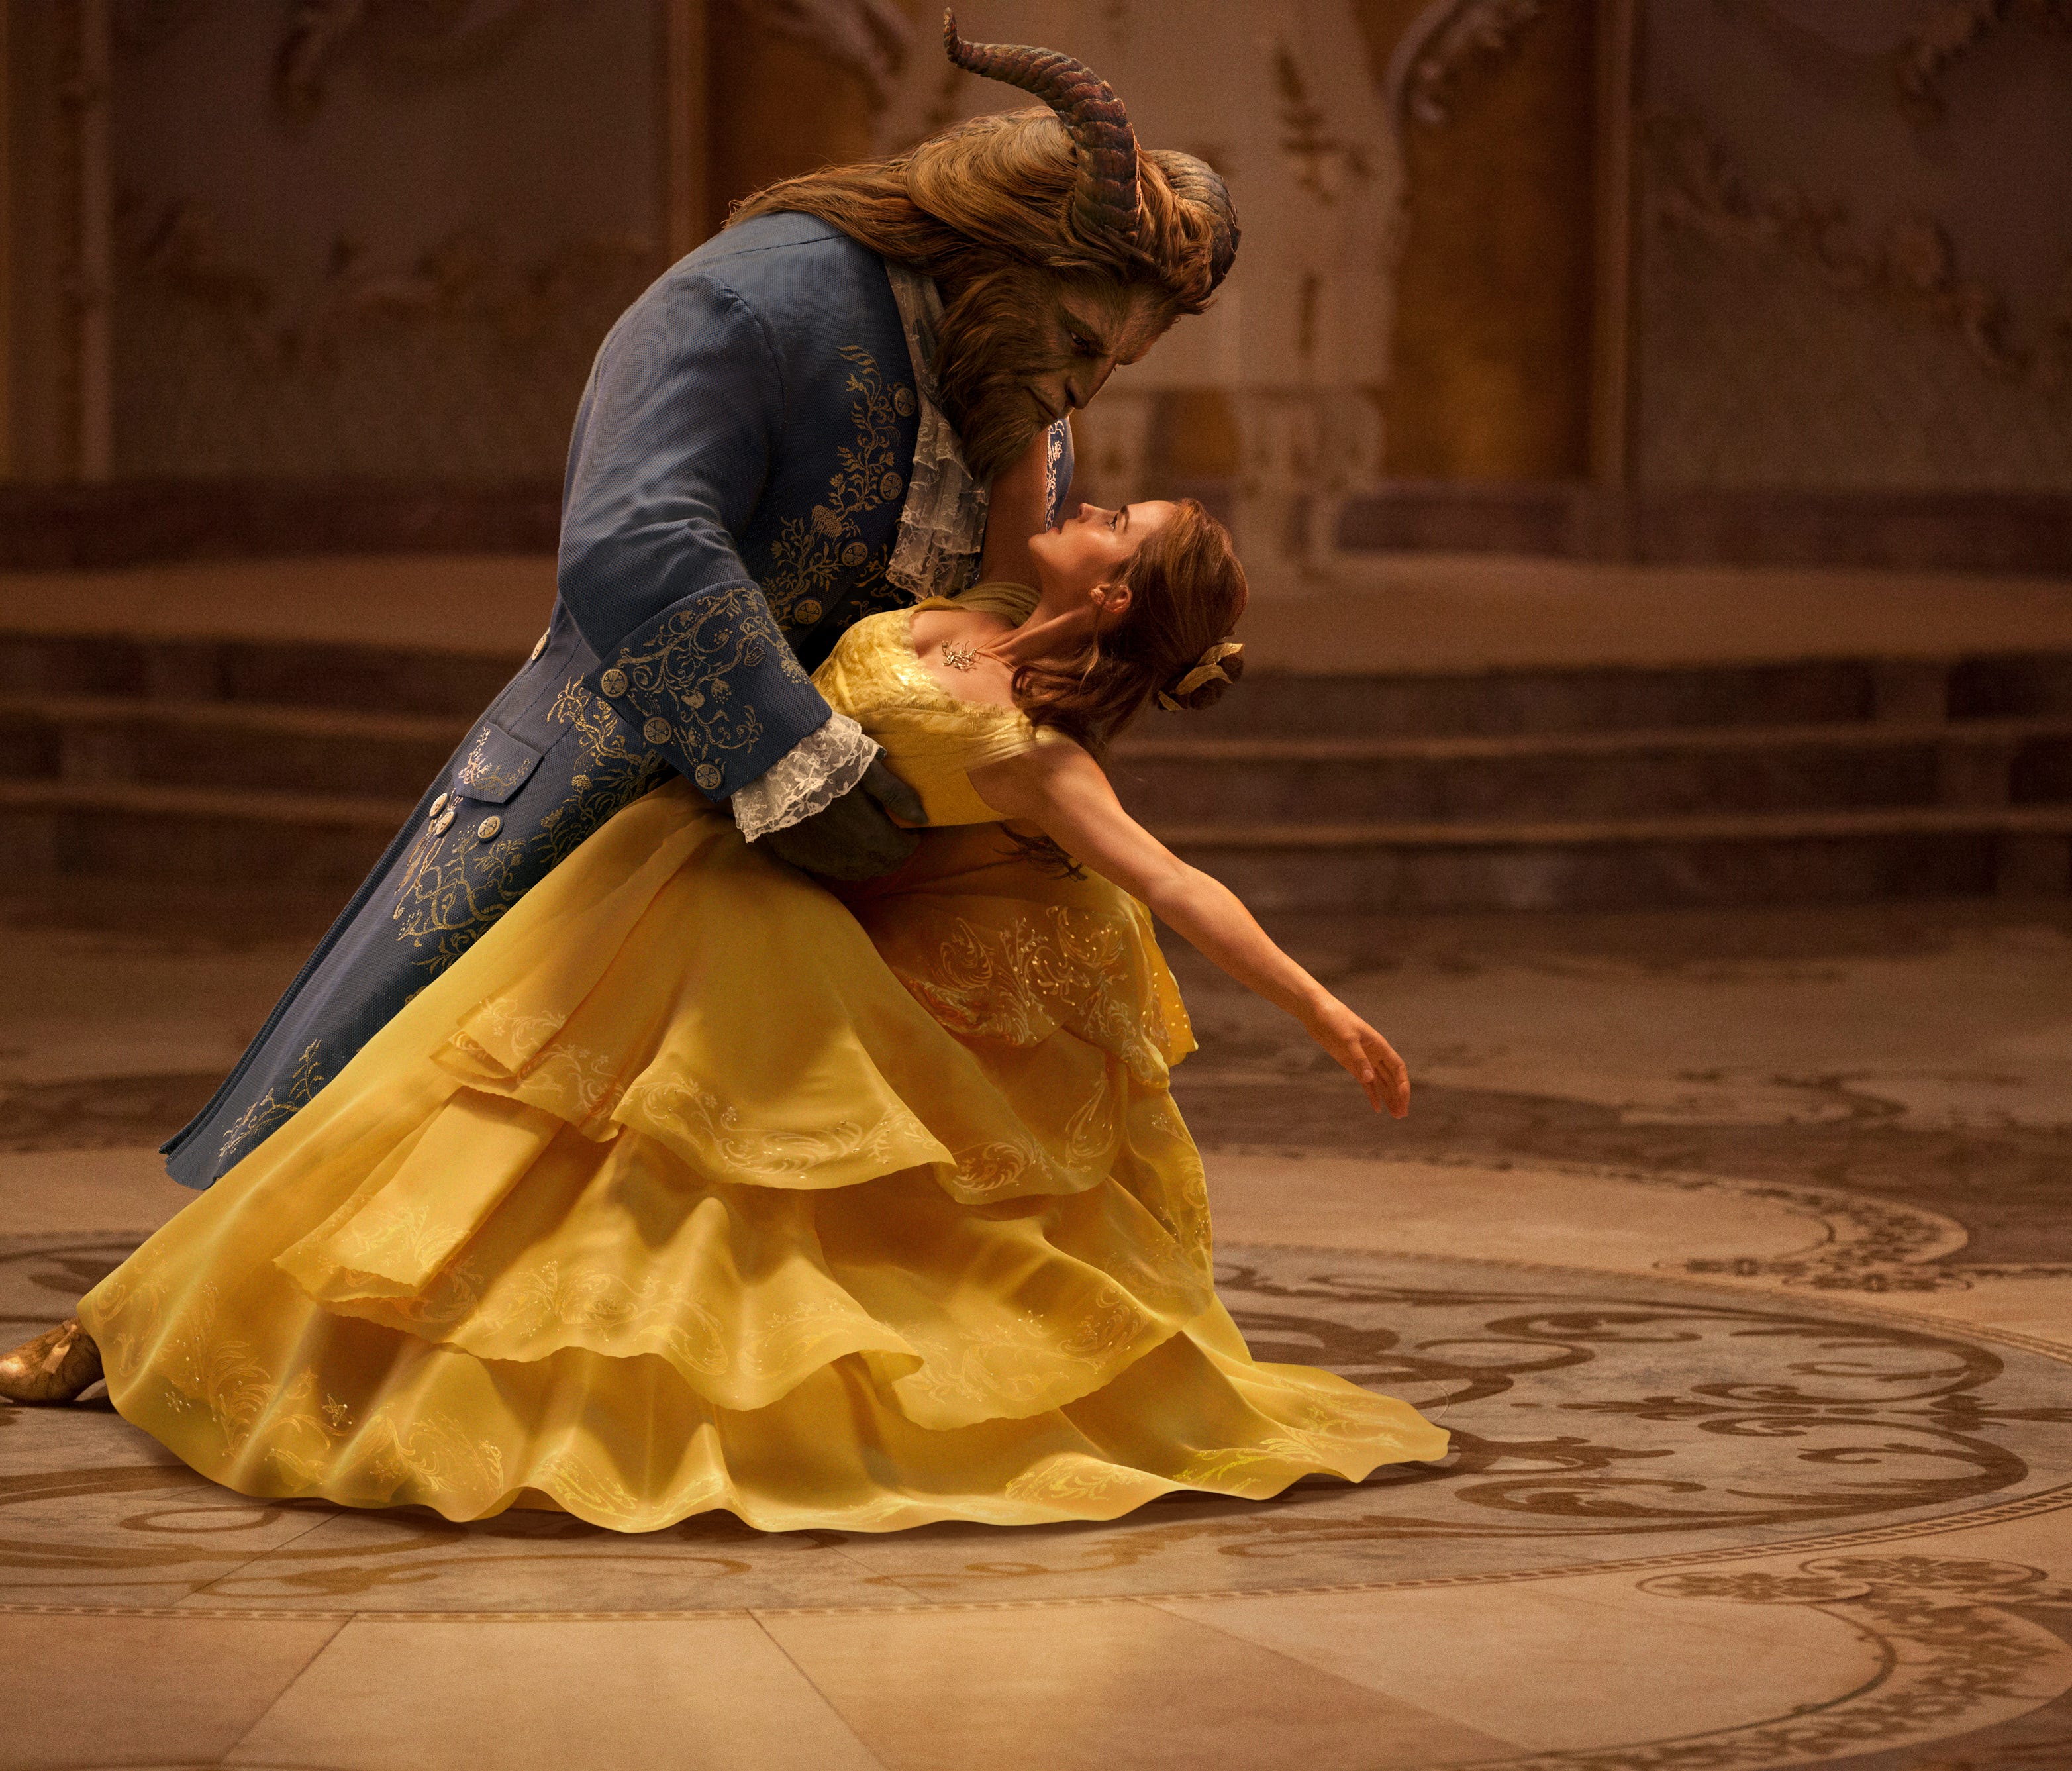 The Beast (Dan Stevens) and Belle (Emma Watson) share a dance in 'Beauty and the Beast.'